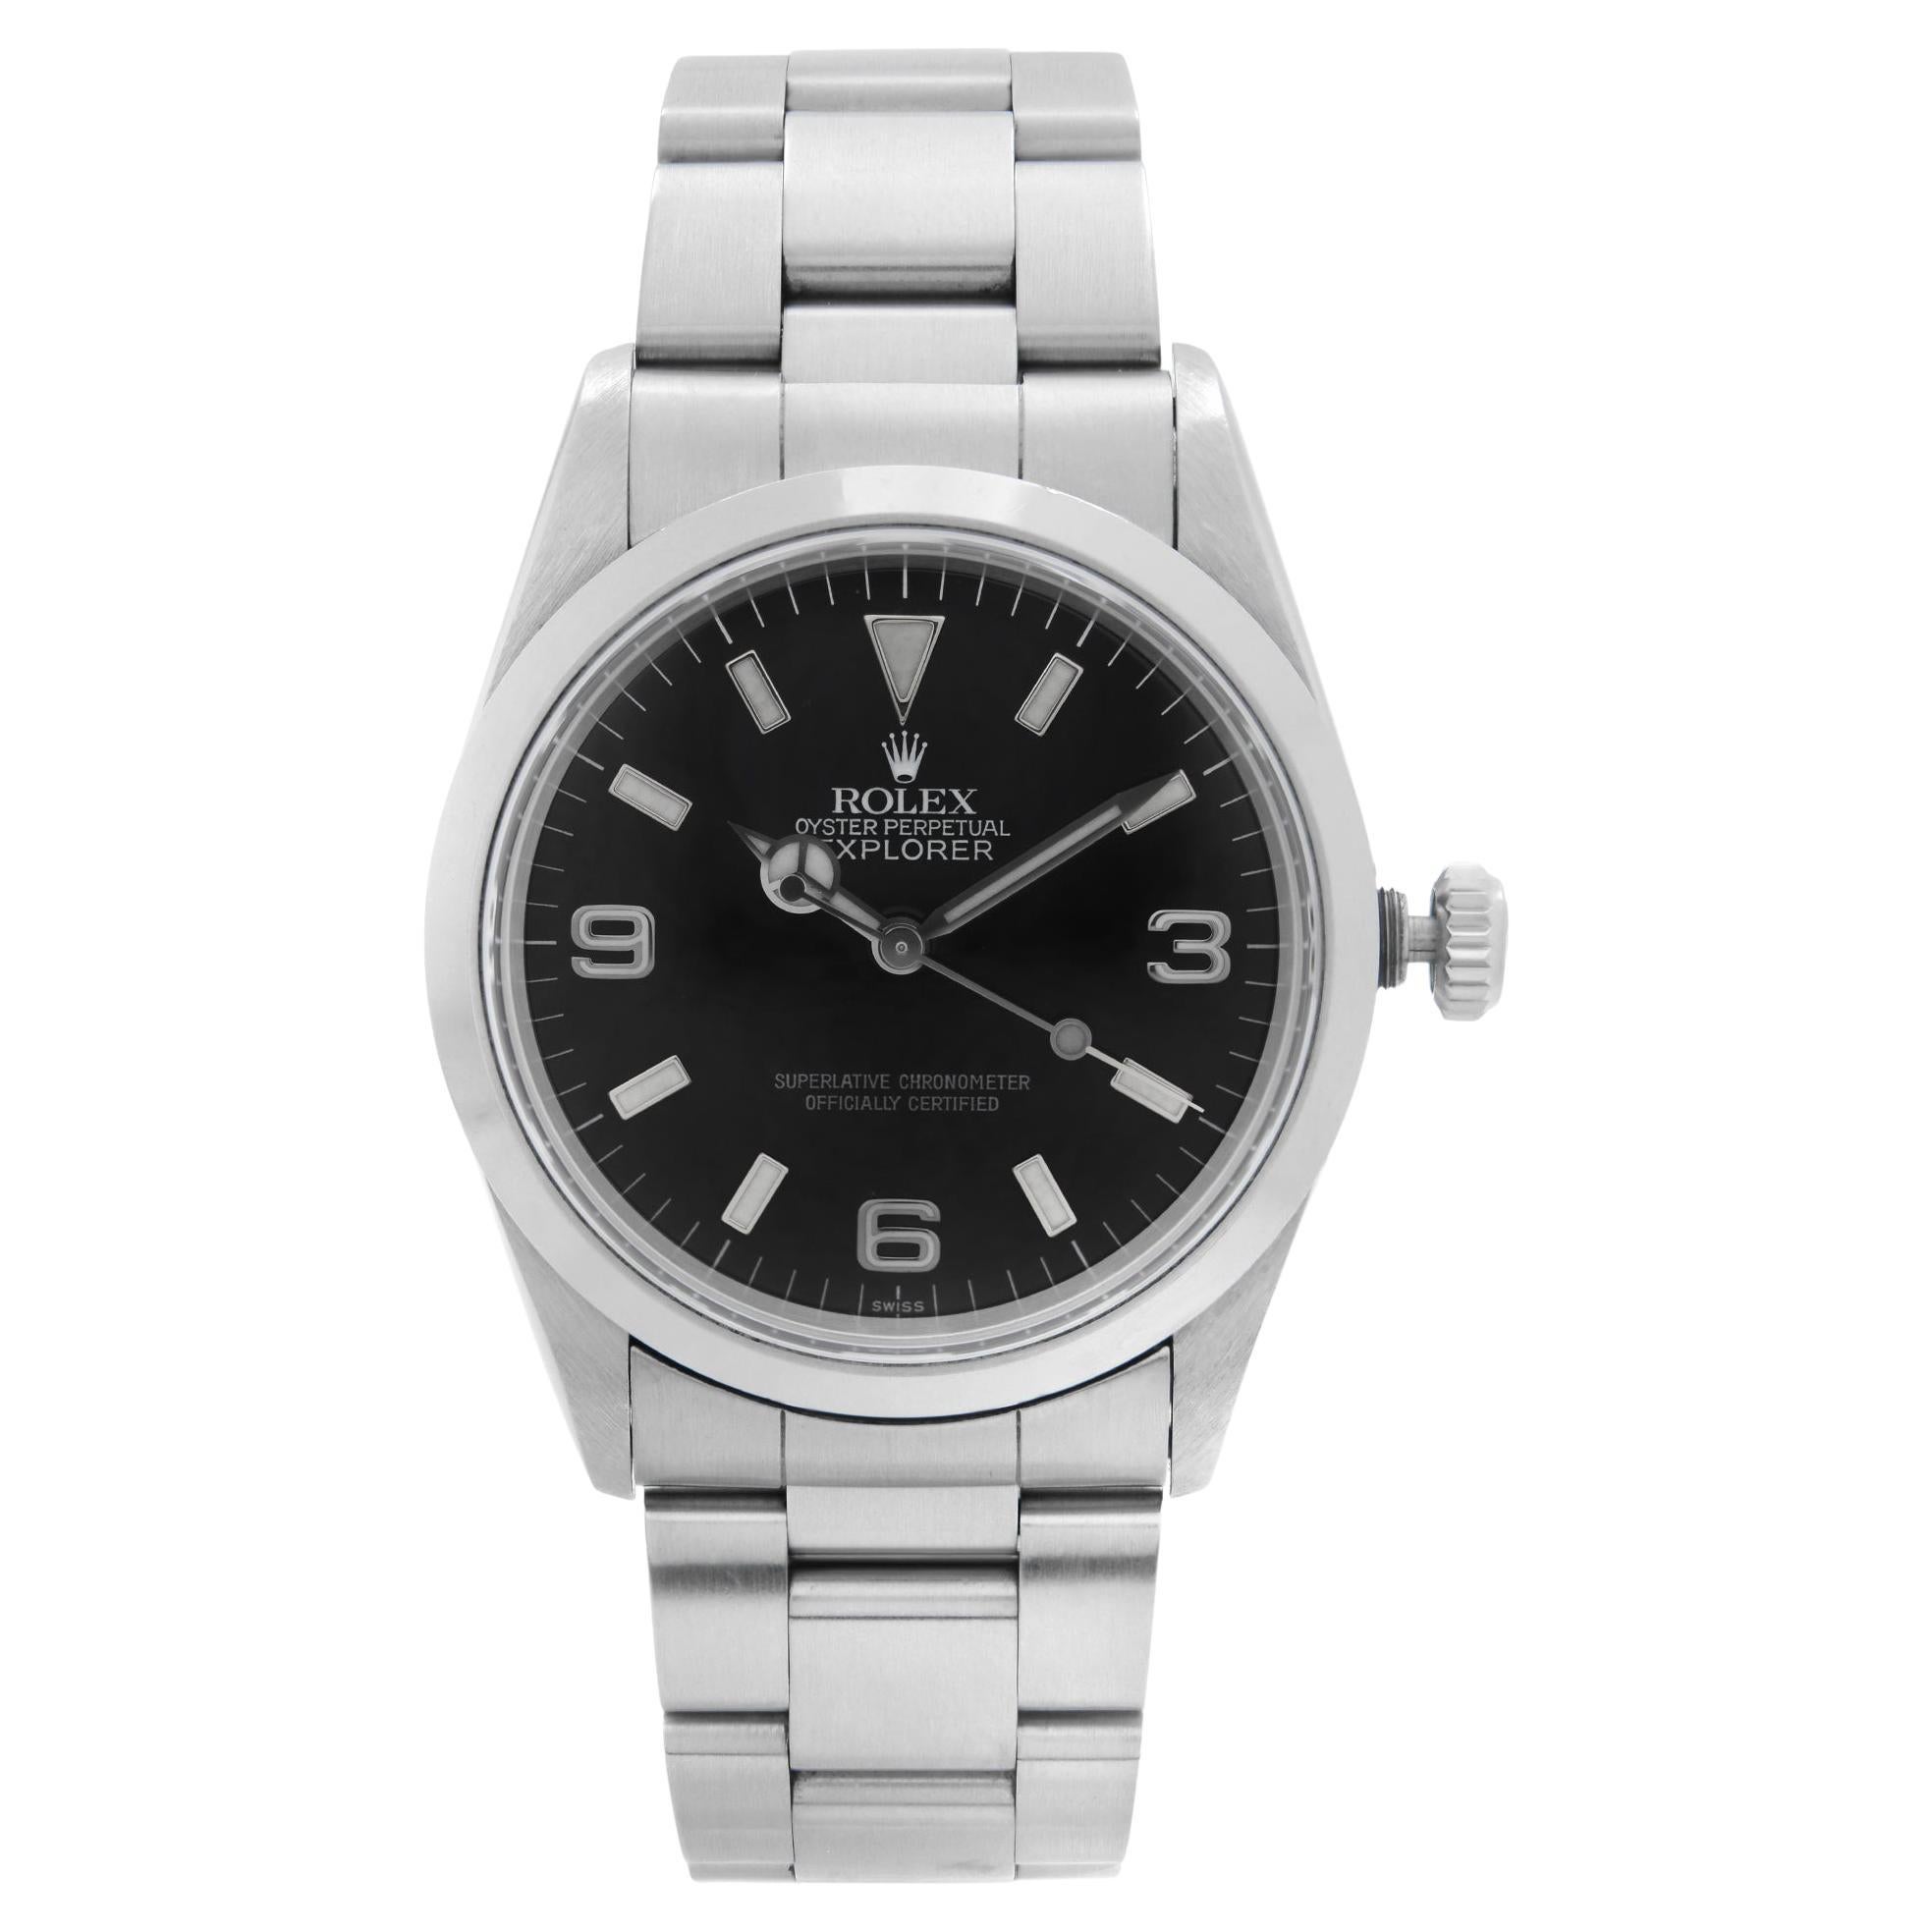 Rolex Explorer I 36mm Black Dial Stainless Steel Mens Watch 124270 ...